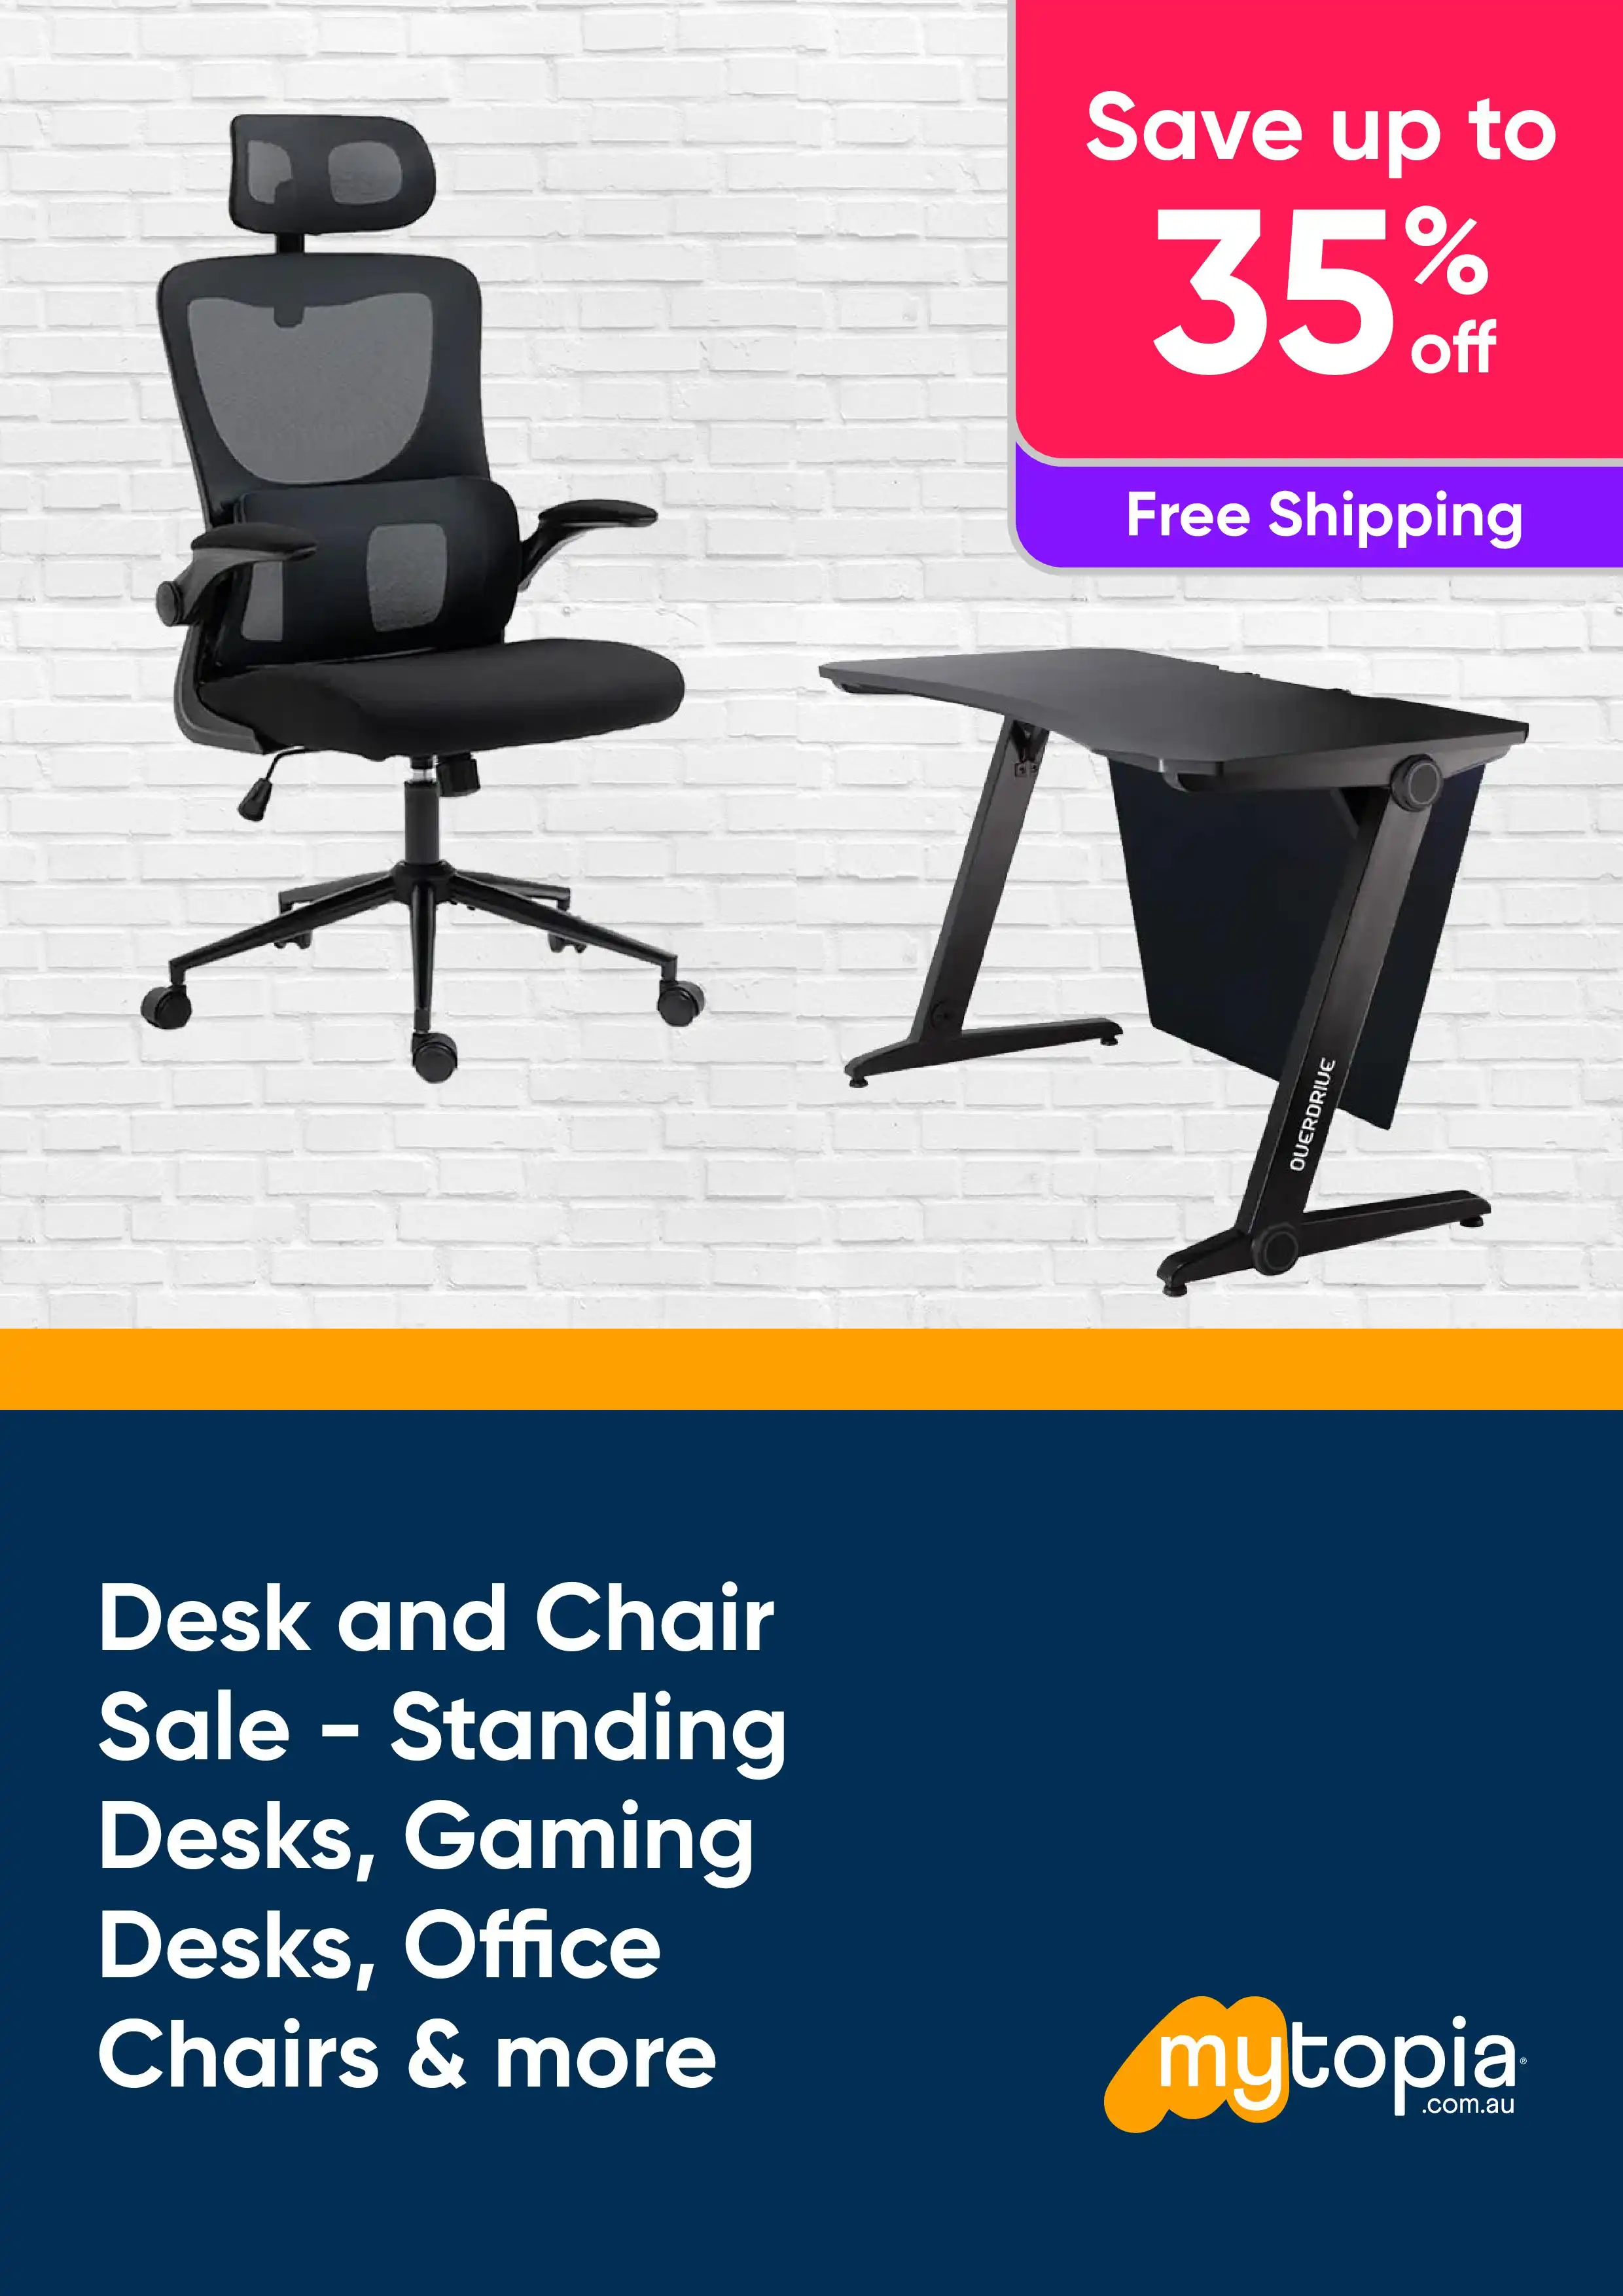 Desk and Chair Sale - Standing Desks, Gaming Desks, Office Chairs and More - Save Up to 35% Off